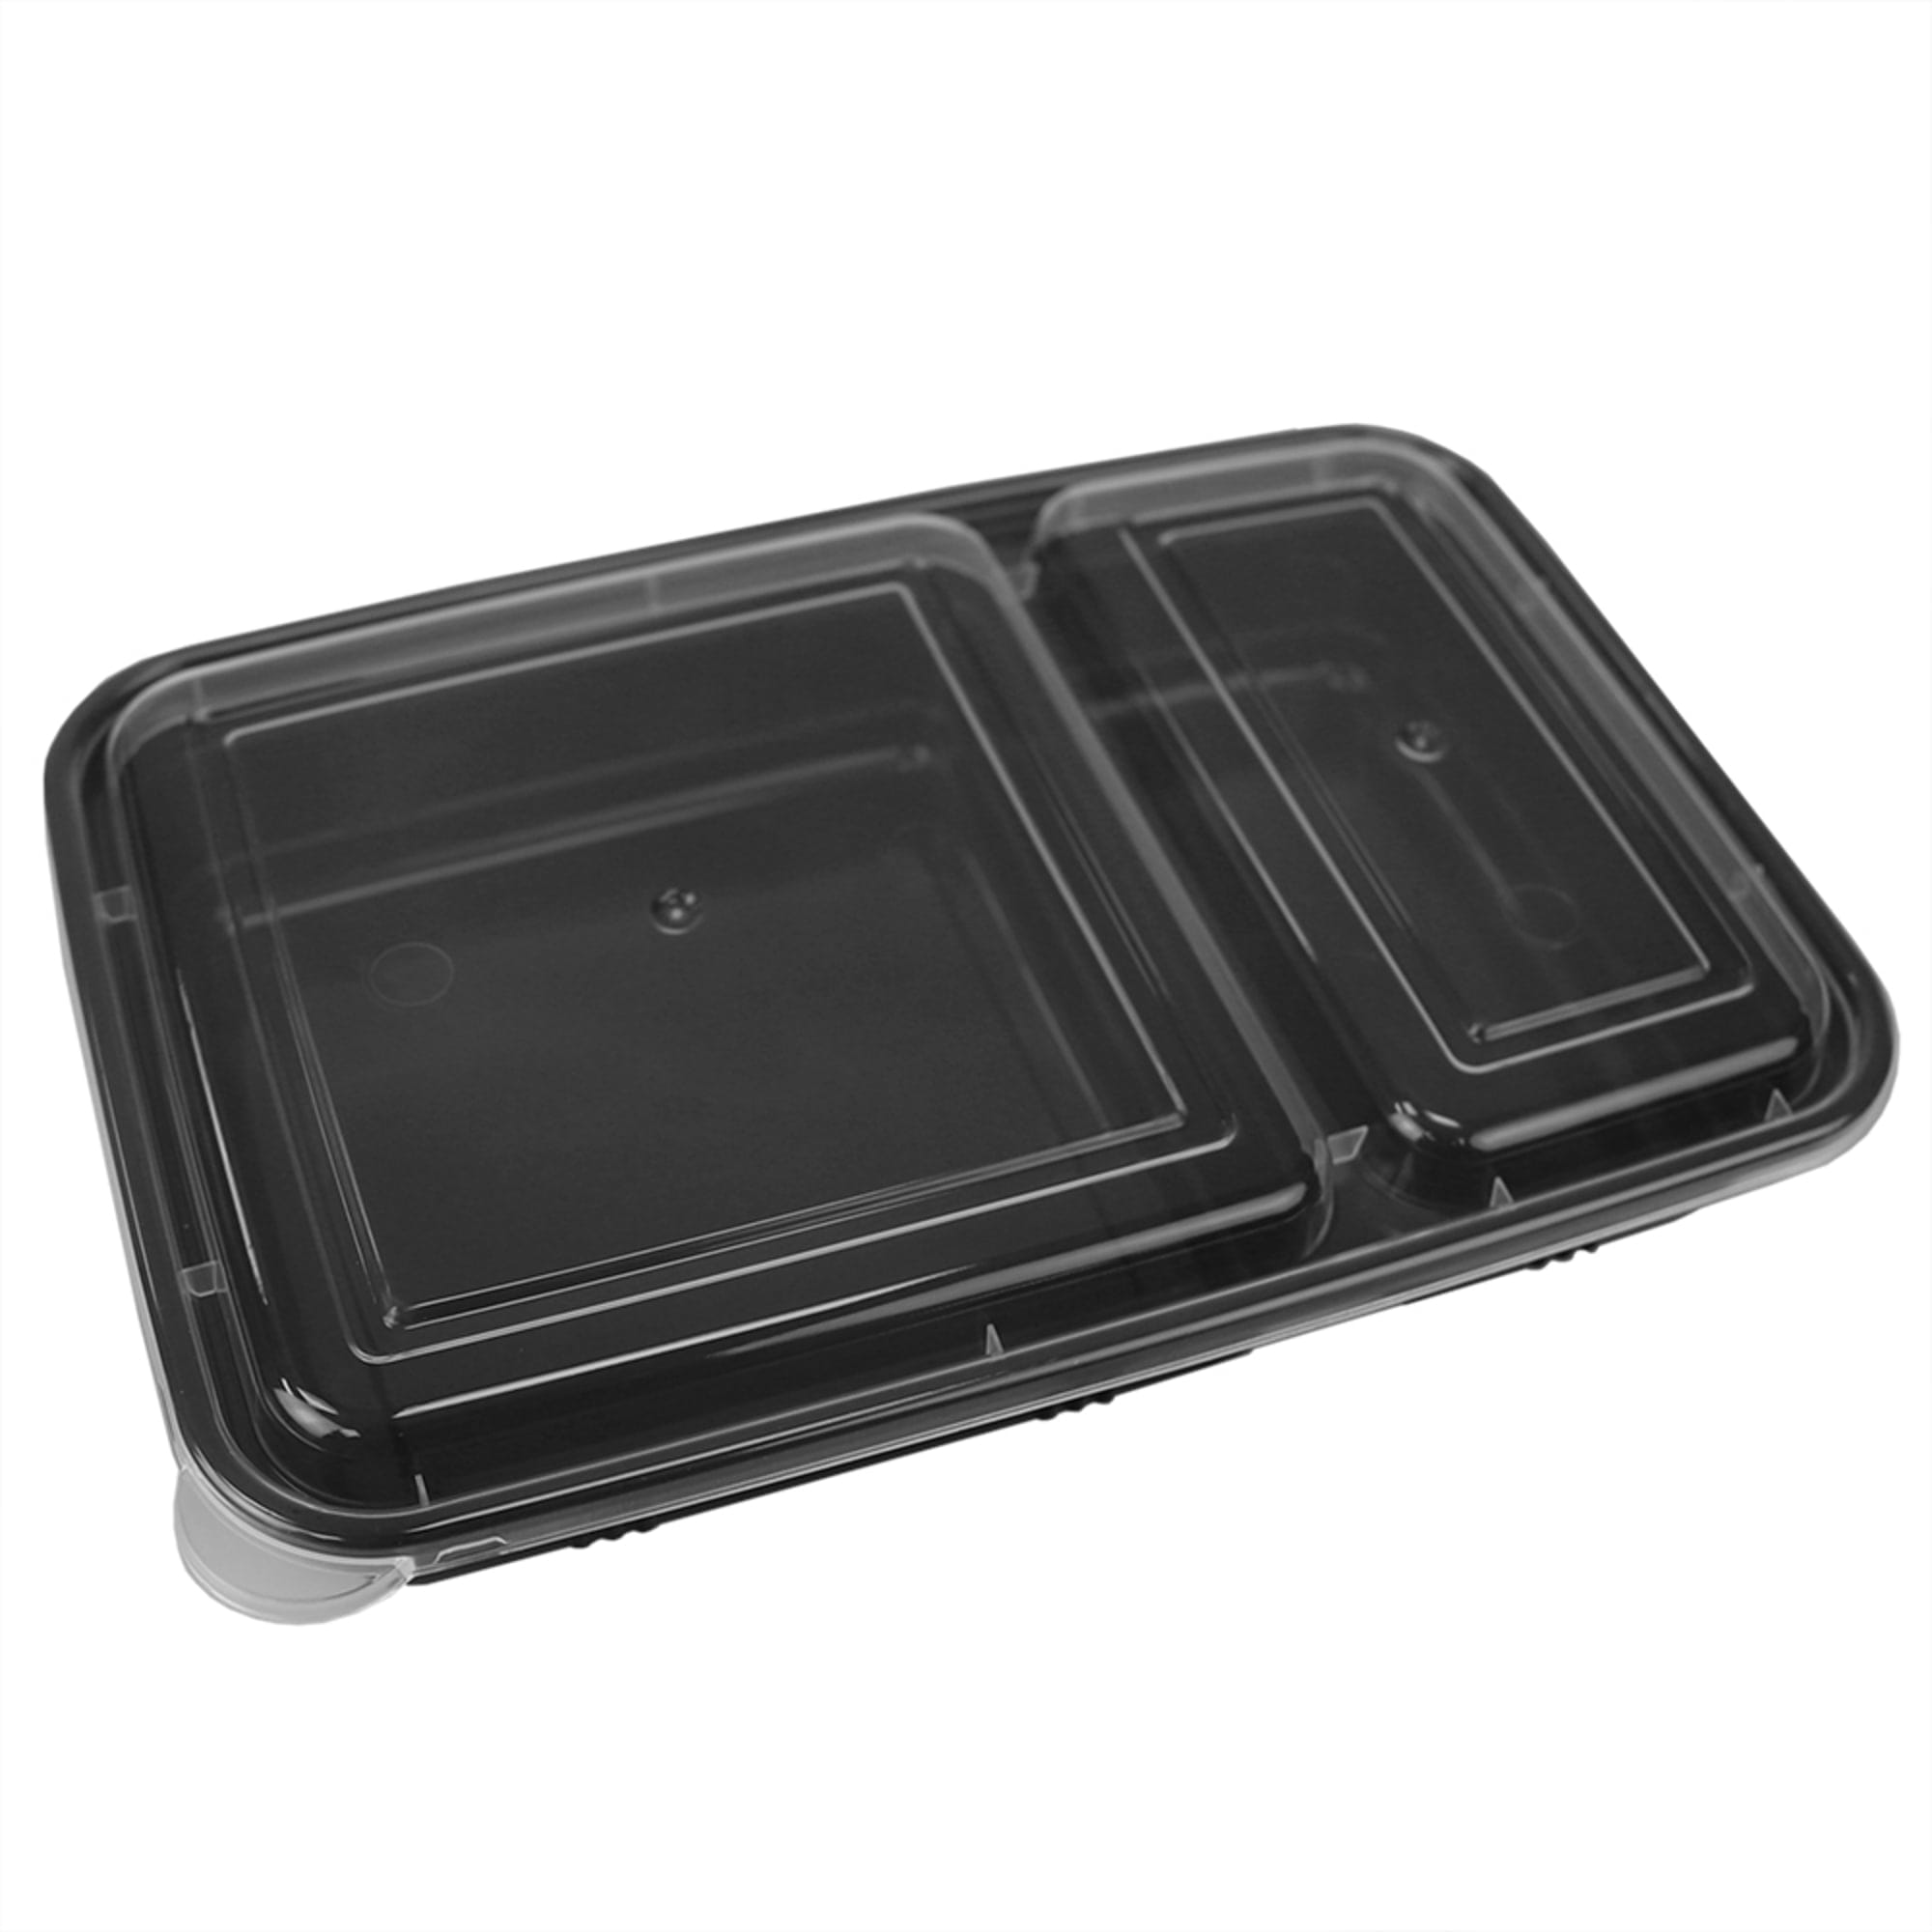 Home Basic 10 Piece 2 Compartment BPA-Free Plastic Meal Prep Containers, Black $3.00 EACH, CASE PACK OF 12